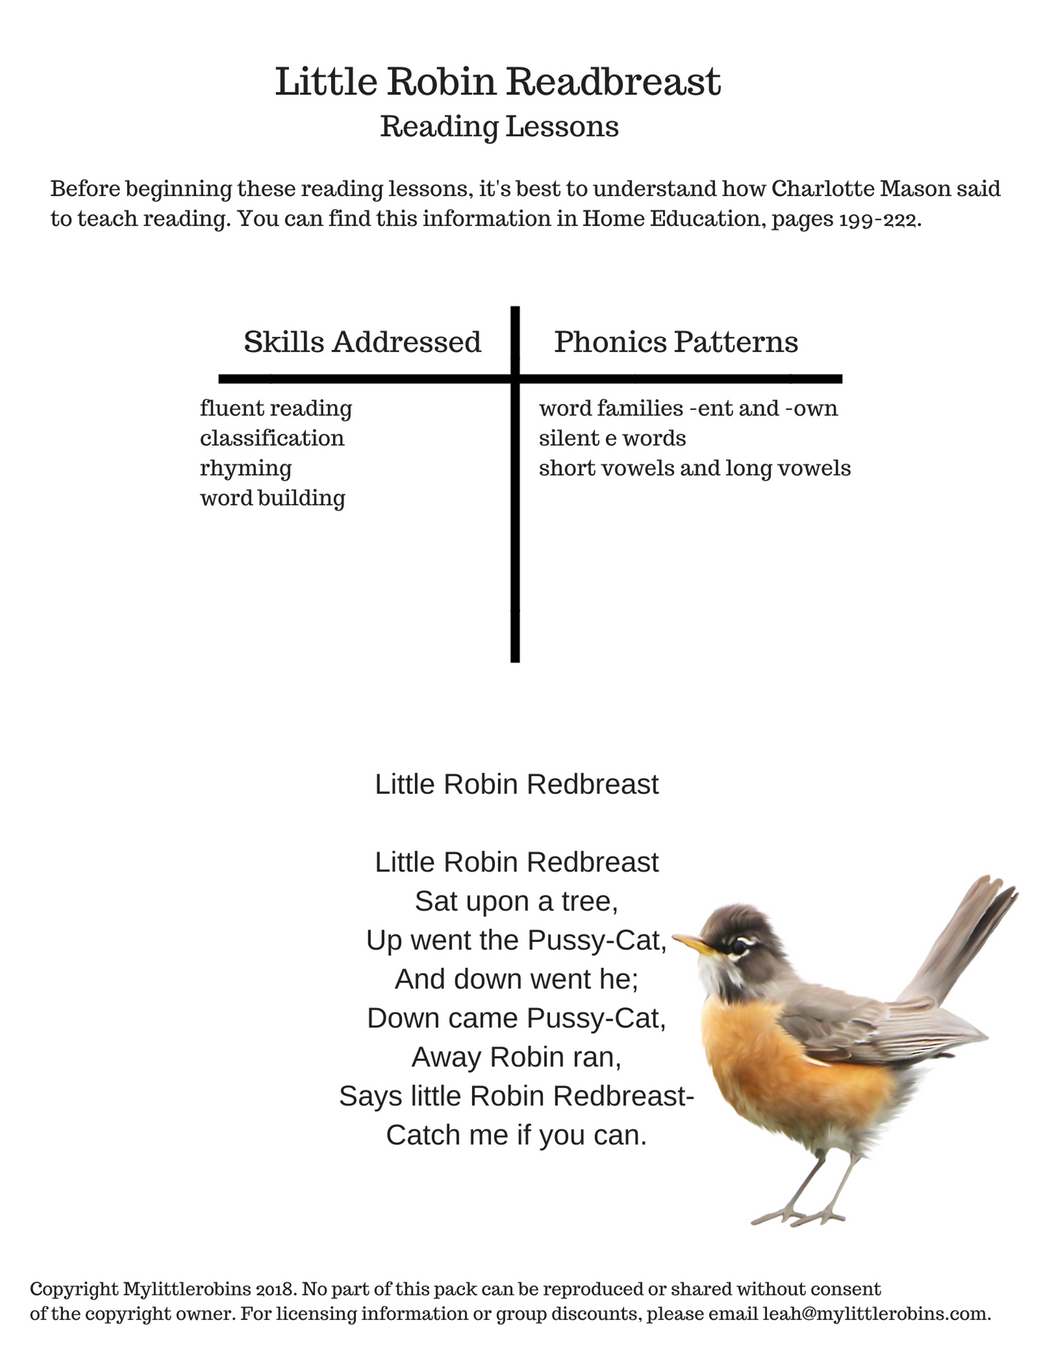 Little Robin Redbreast Printable Reading Pack